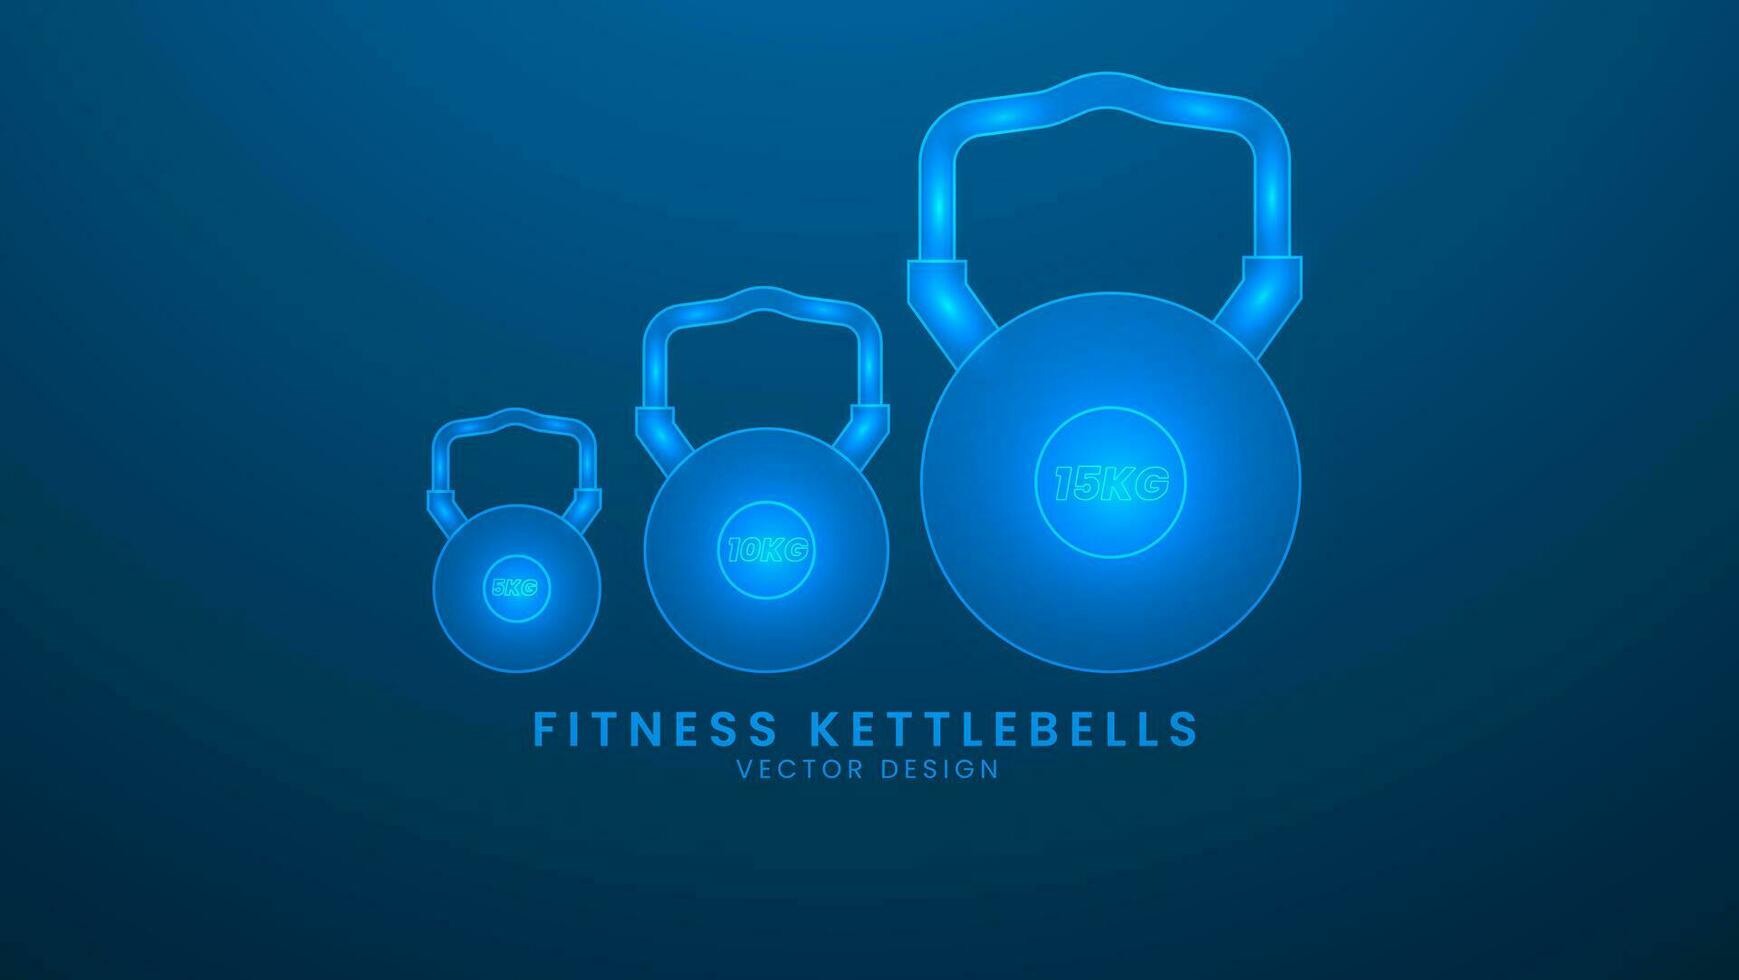 Fitness kettlebells. Sport training and fitness. Vector illustration with light effect and neon